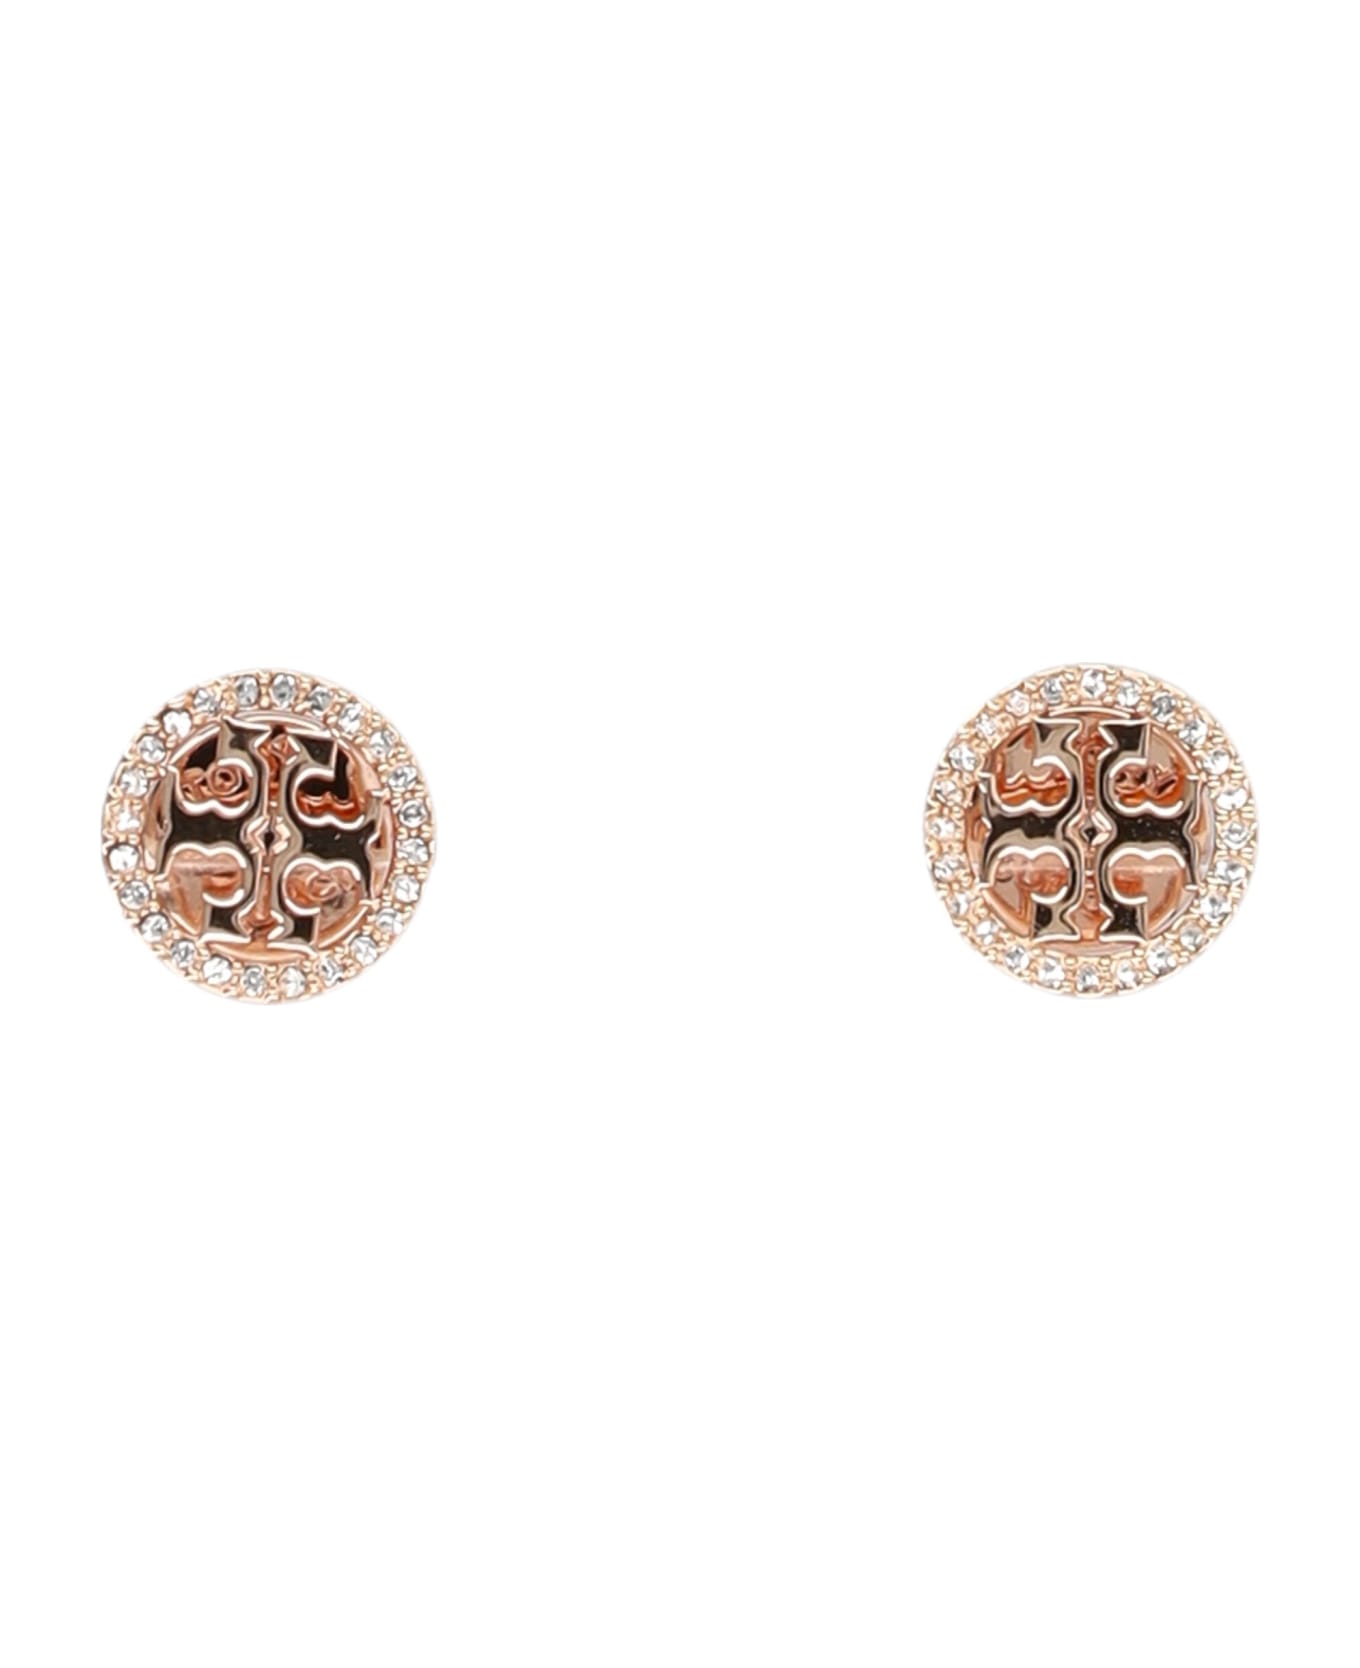 Tory Burch Miller Pave Stud Earring - Rose Gold / Crystal イヤリング